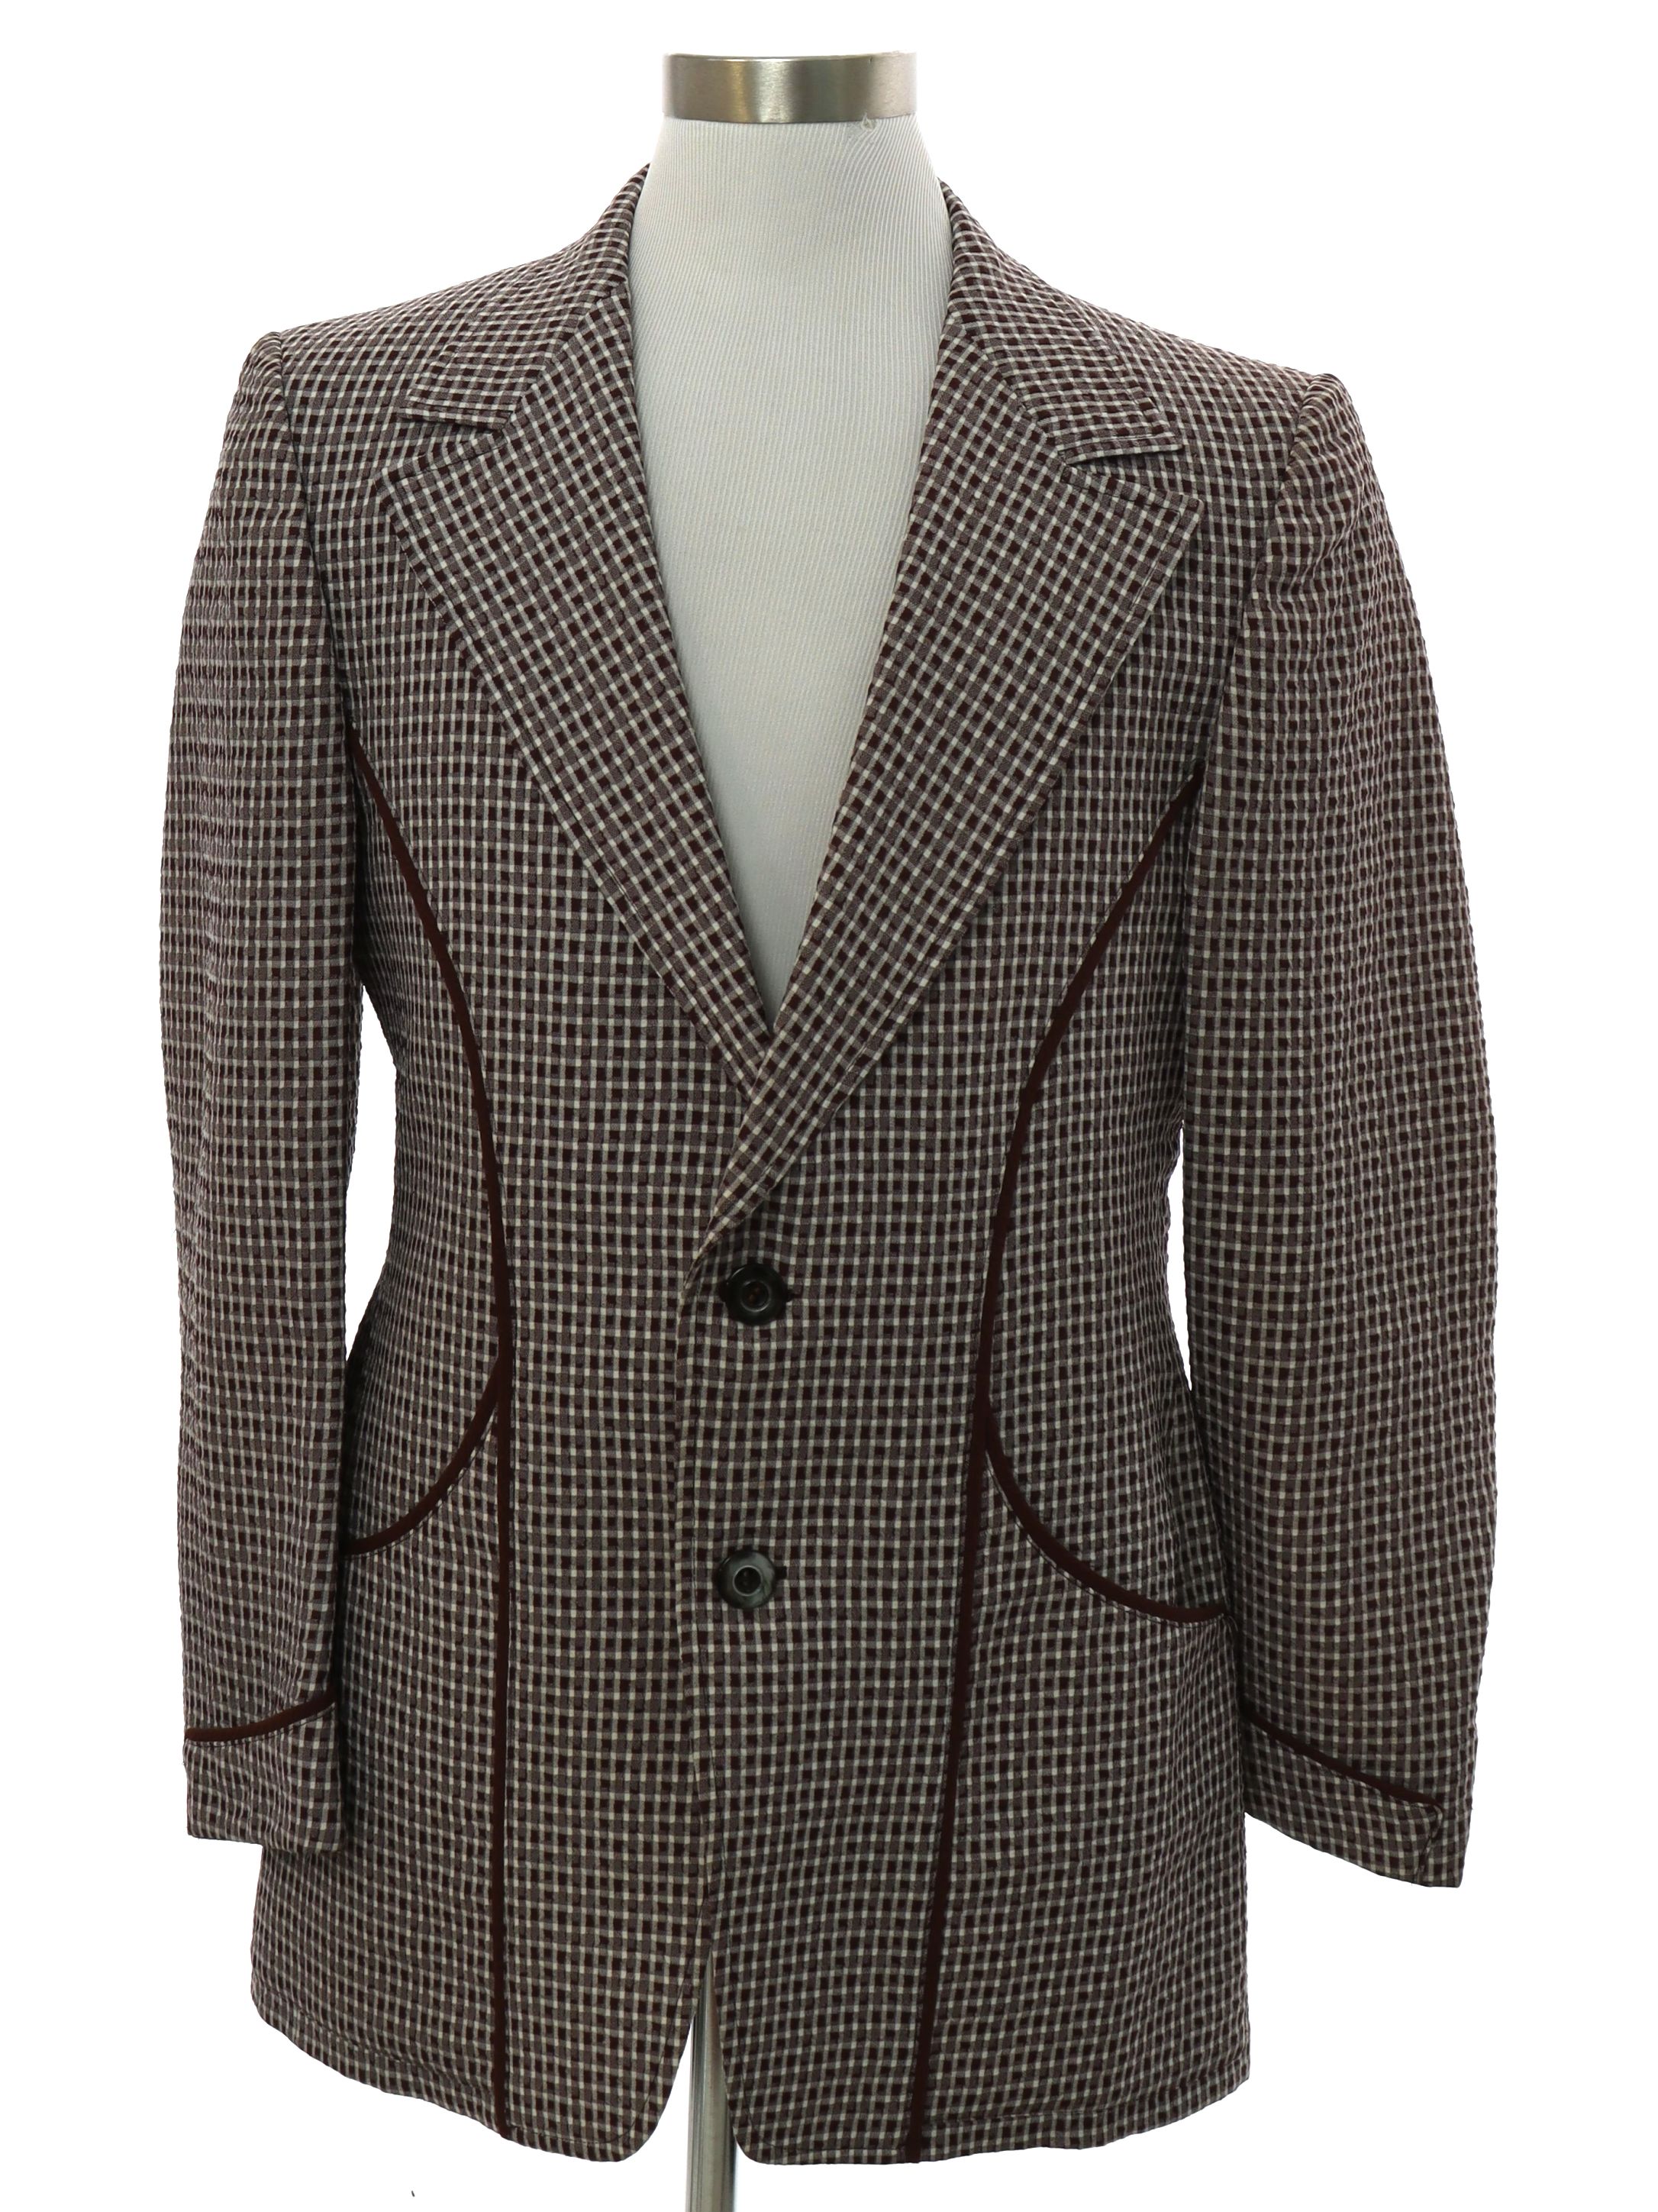 1970's Retro Jacket: 70s -No Label- Mens brown and white plaid ...